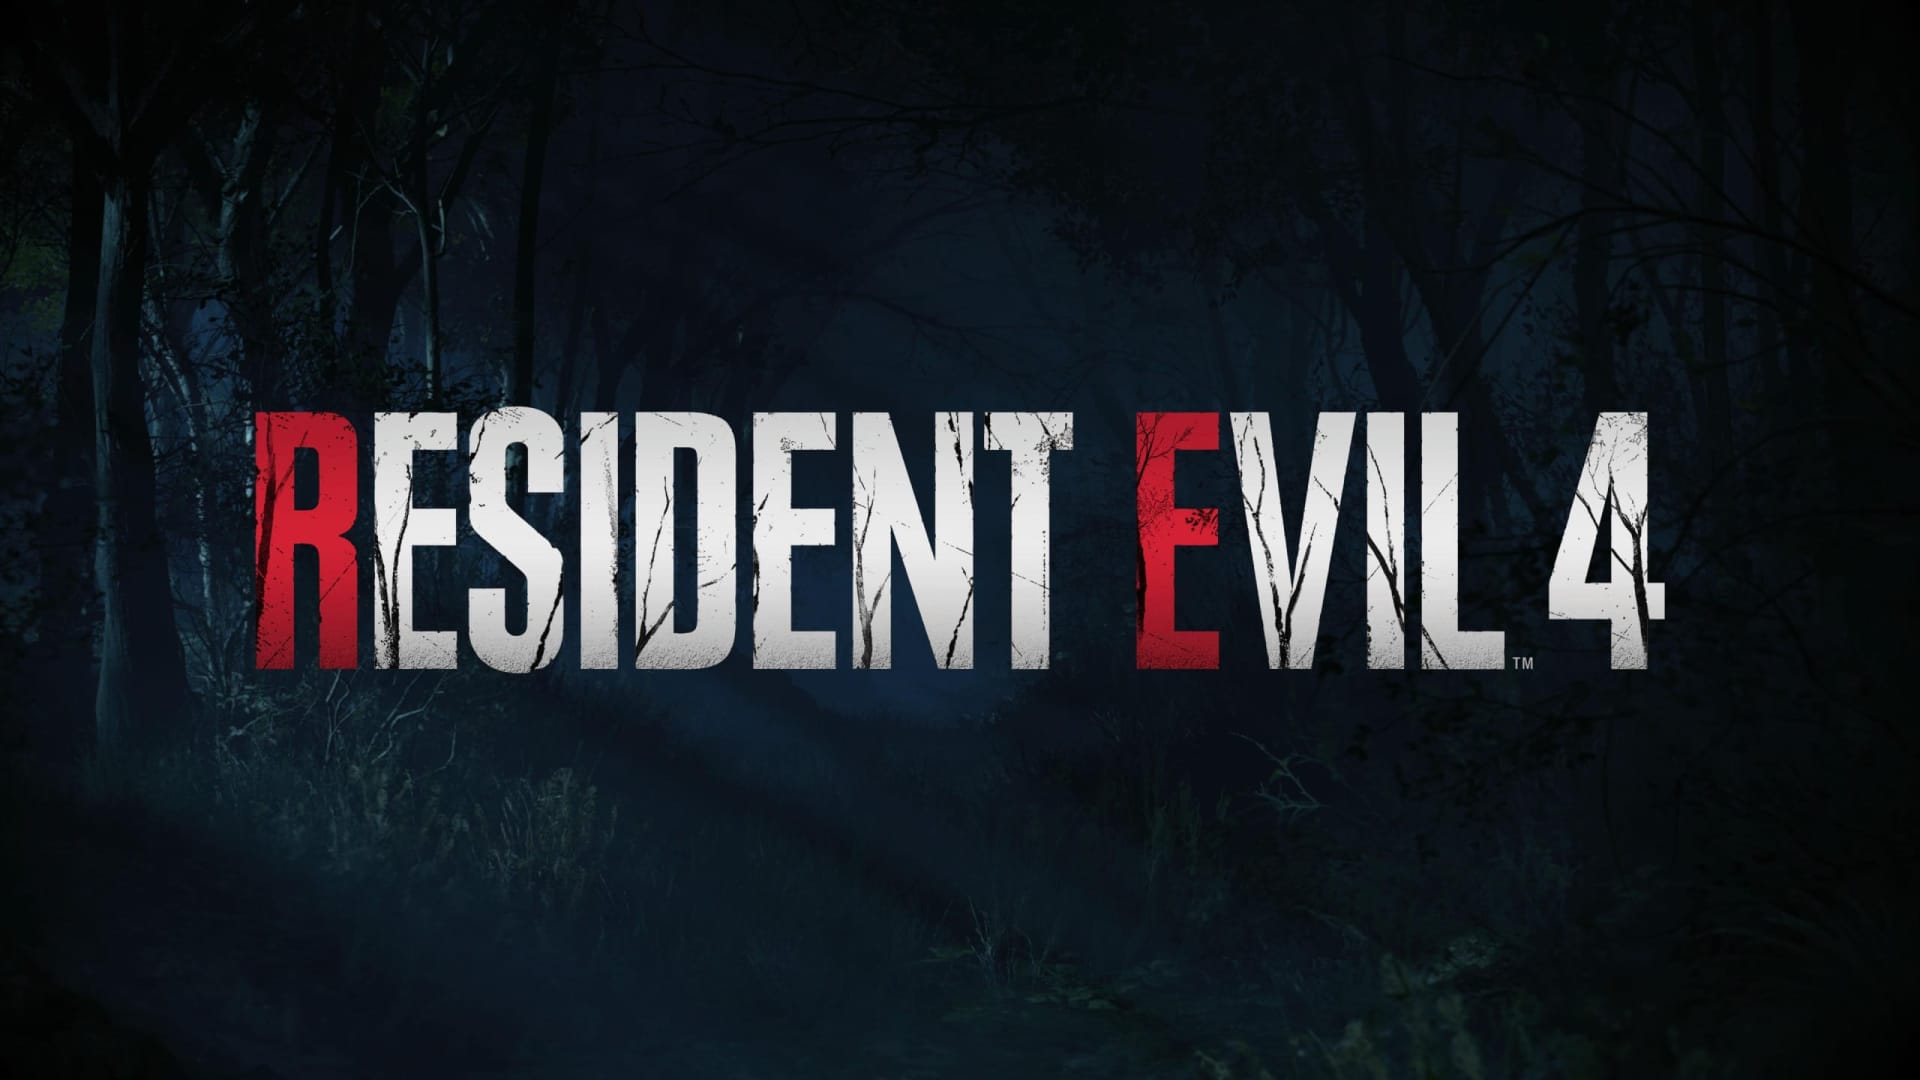 Events Calendar, Video Game Review - Resident Evil 3, Library Blog, About Us